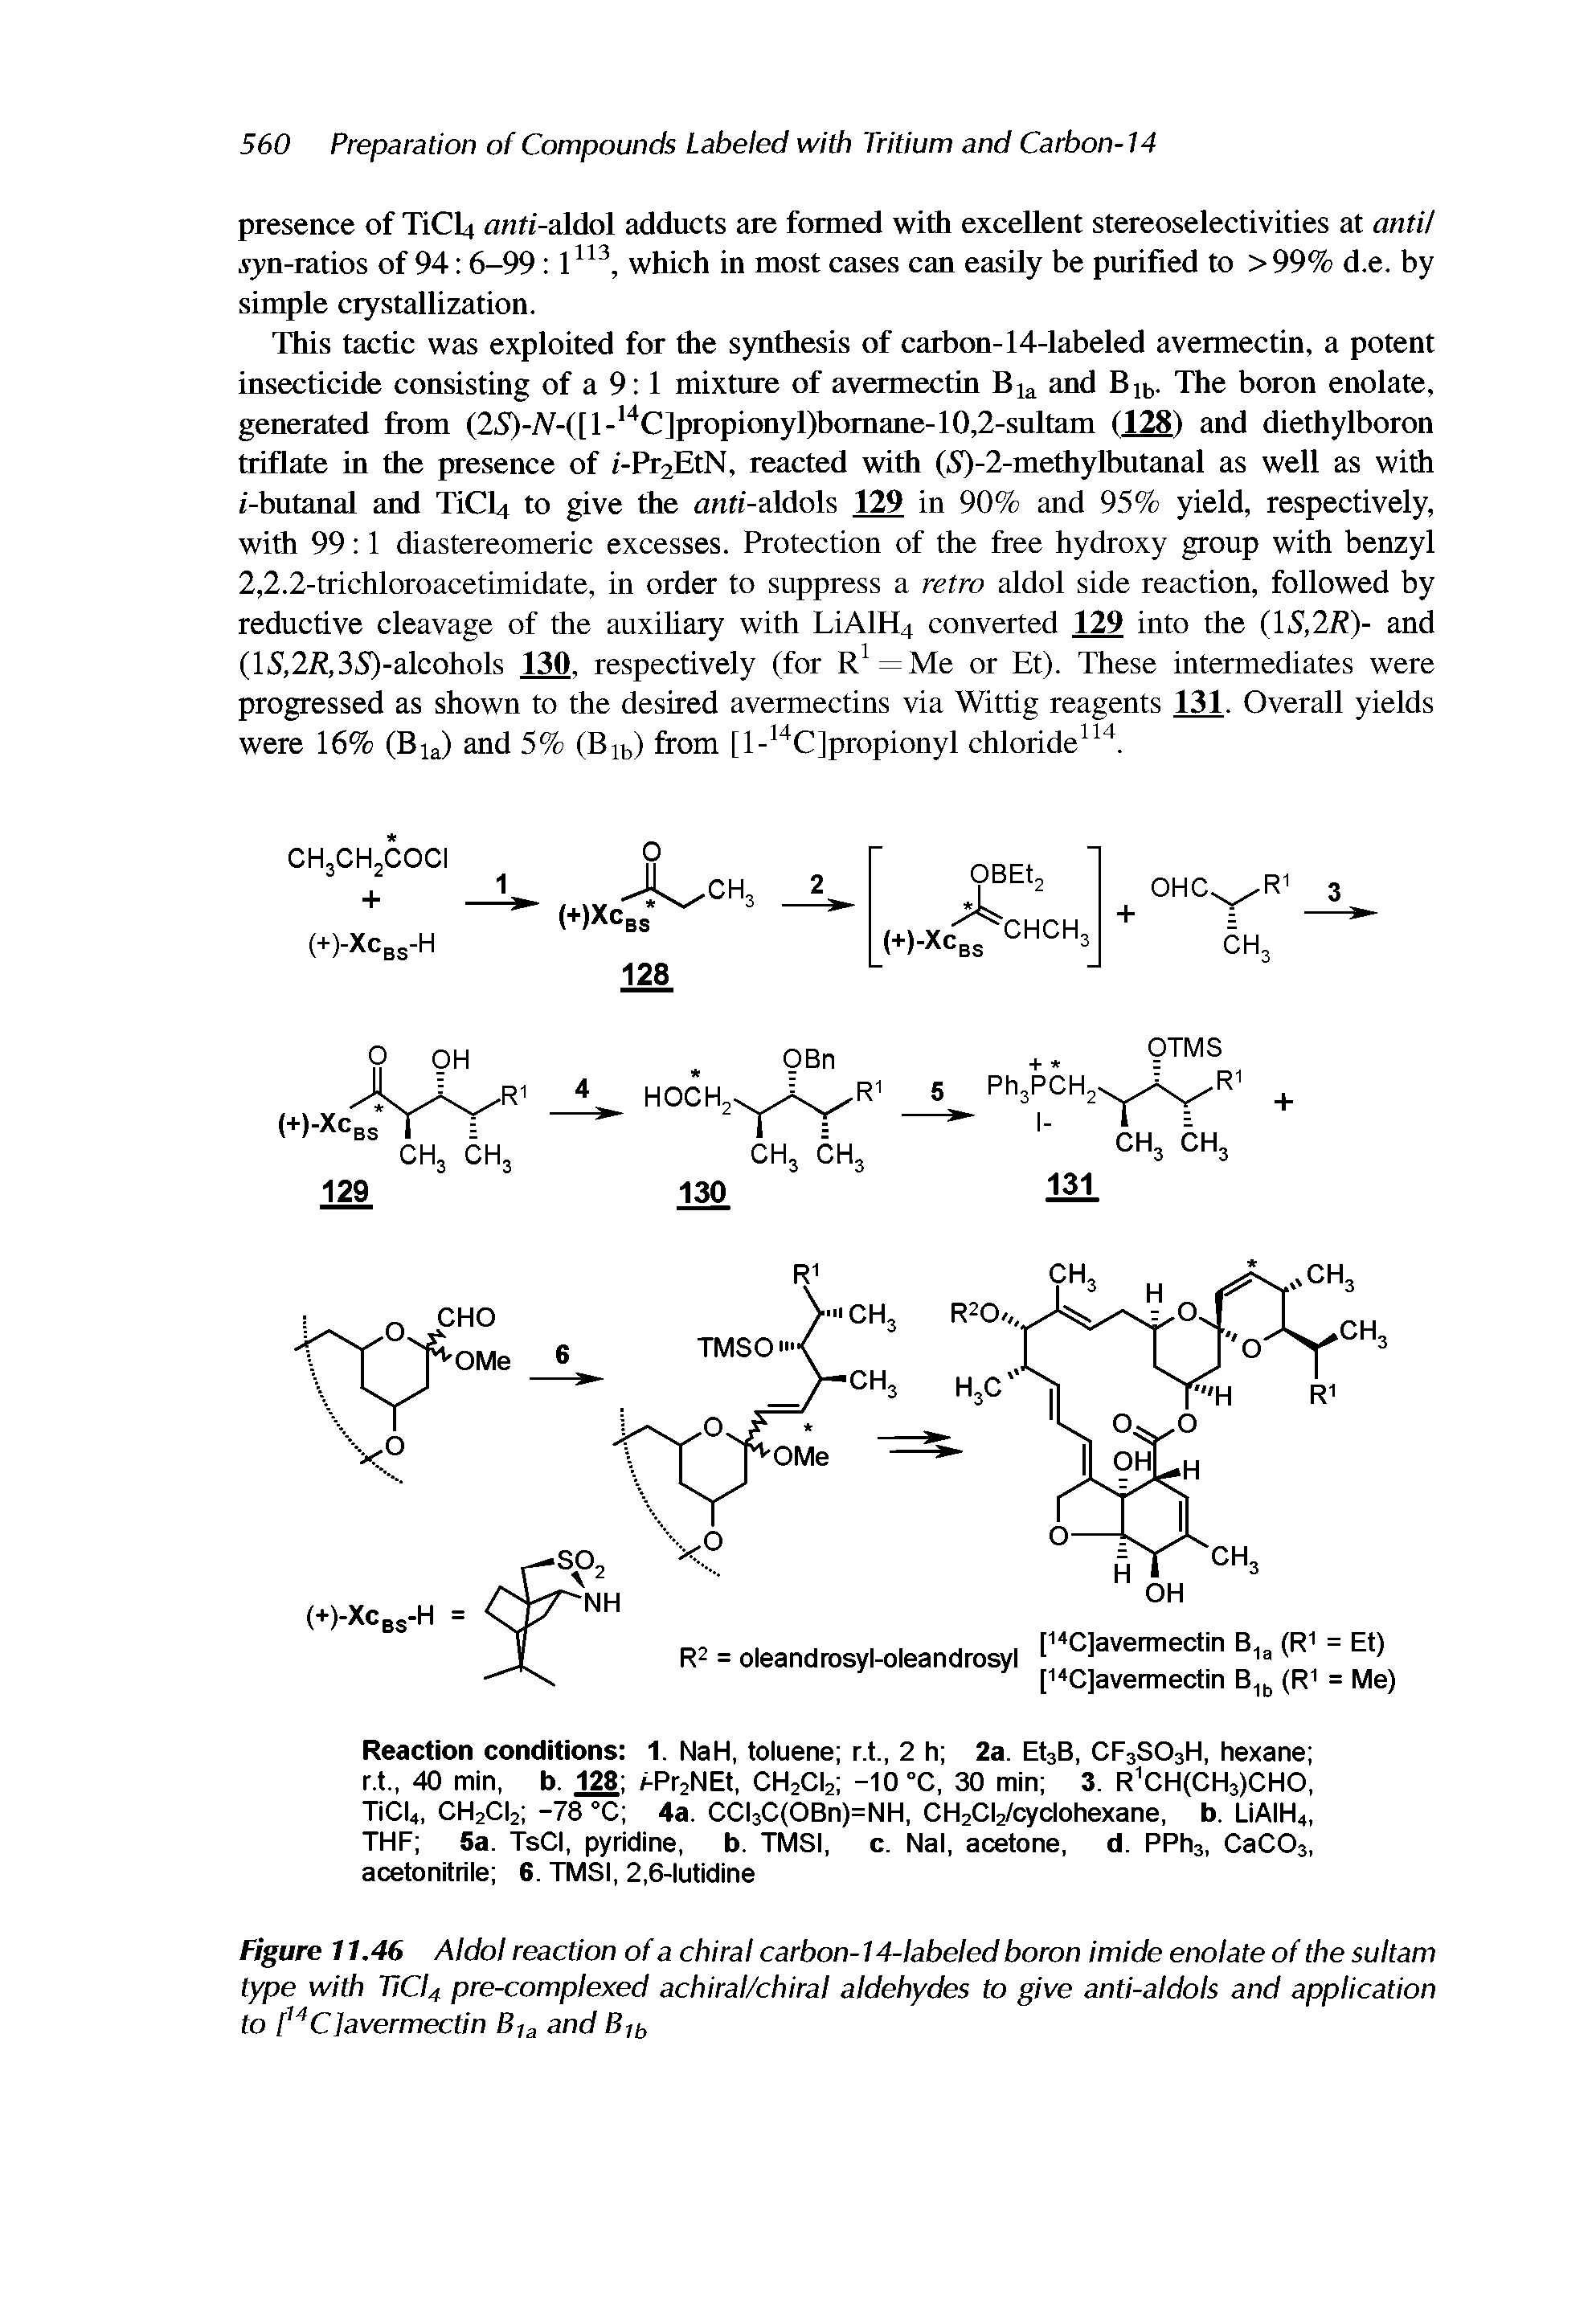 Figure 11.46 Aldol reaction of a chiral carbon-14-labeled boron imide enolate of the sultam type with TiCU pre-complexed achiral/chiral aldehydes to give anti-aldols and application to [ C]avermectin 6/a and Bji,...